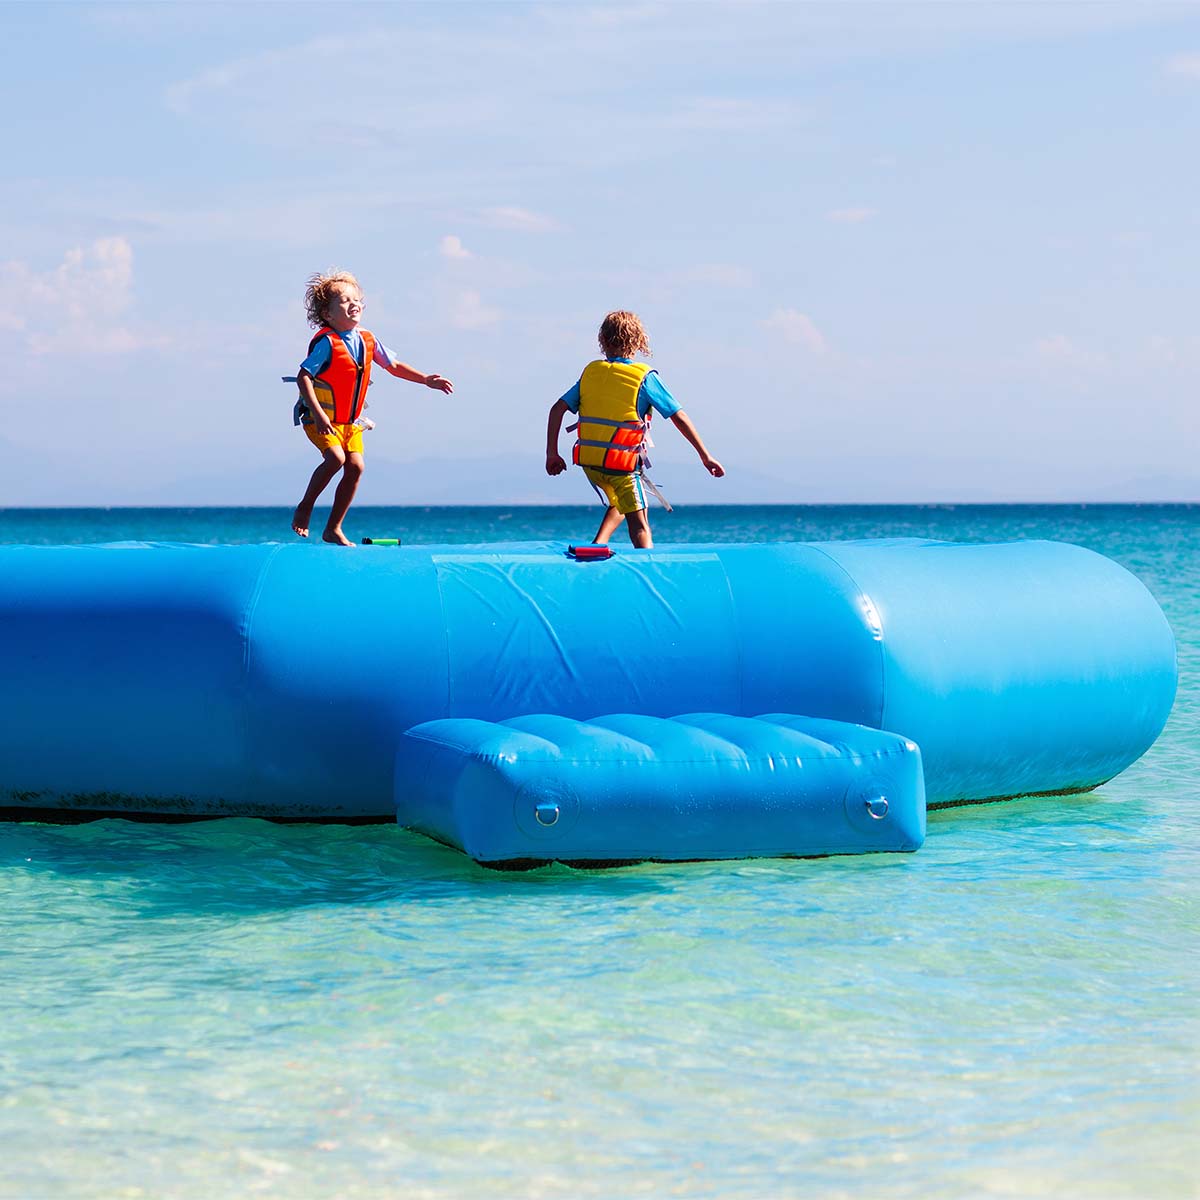 Bouncing on Water: Discovering the Joy of a Water Trampoline